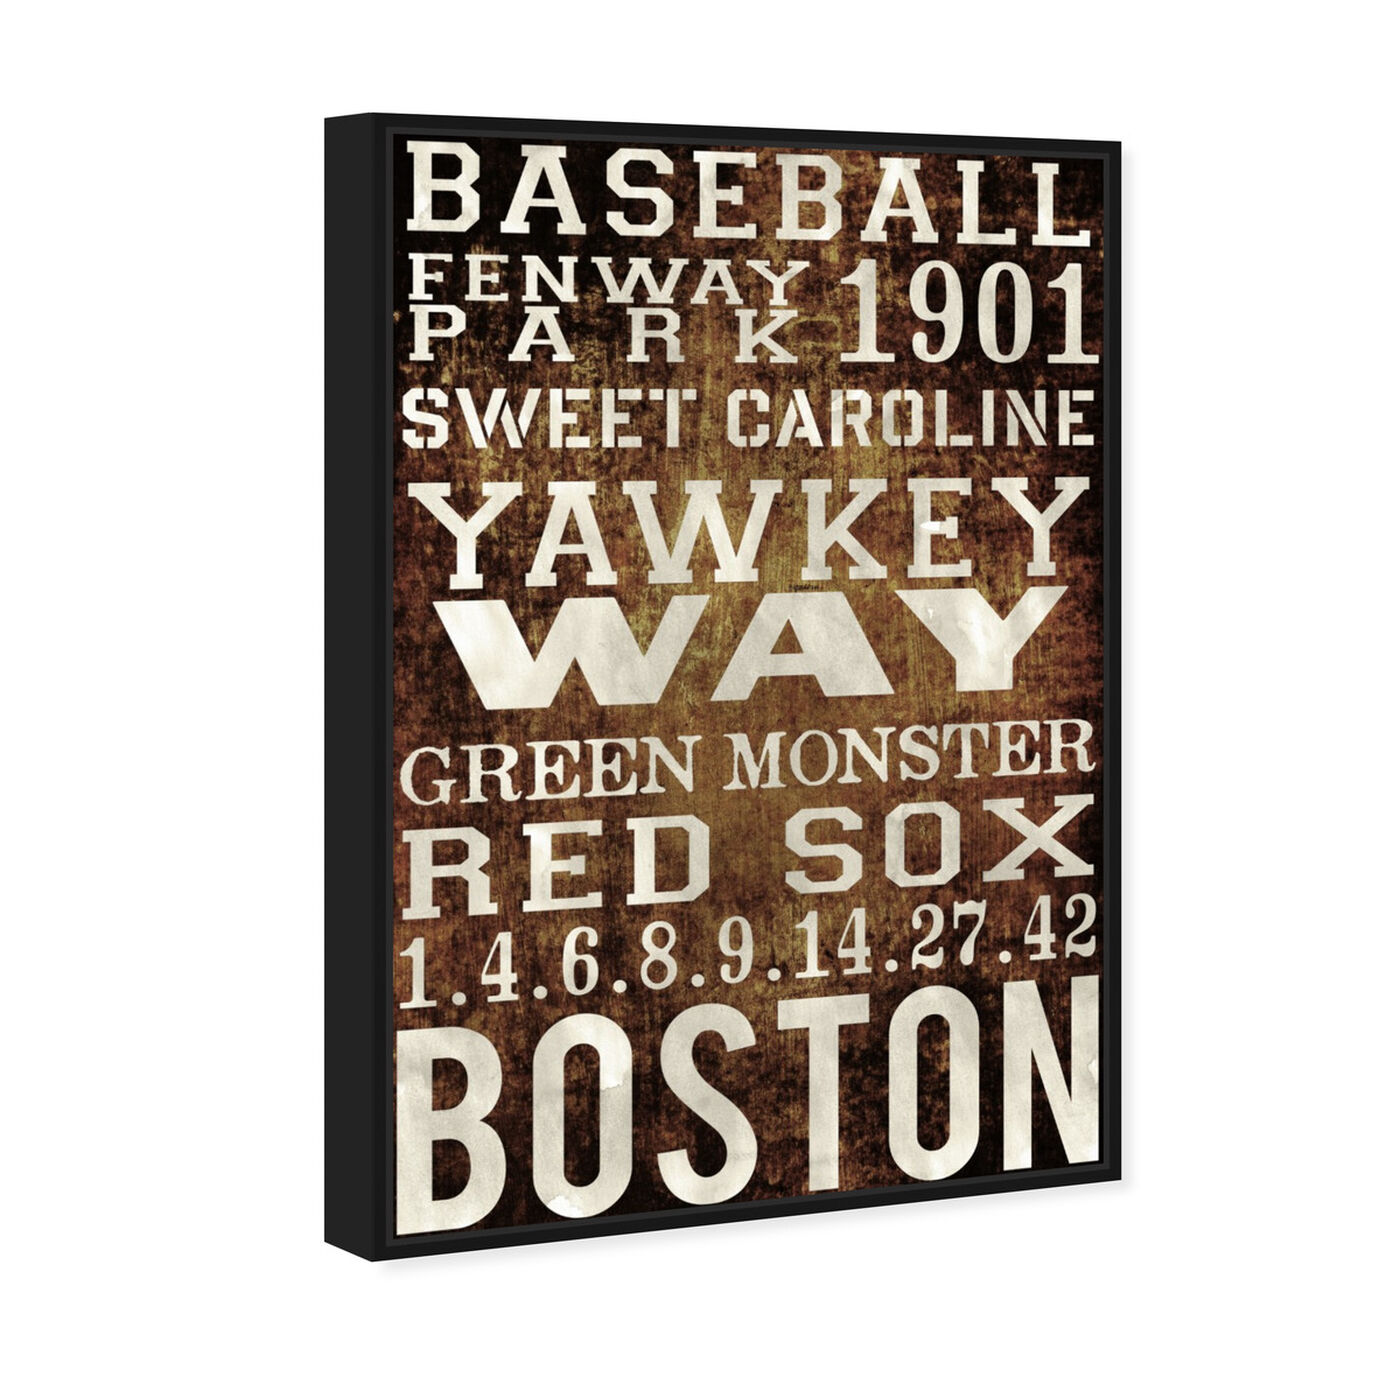 Angled view of Boston Red Sox featuring advertising and publications art.